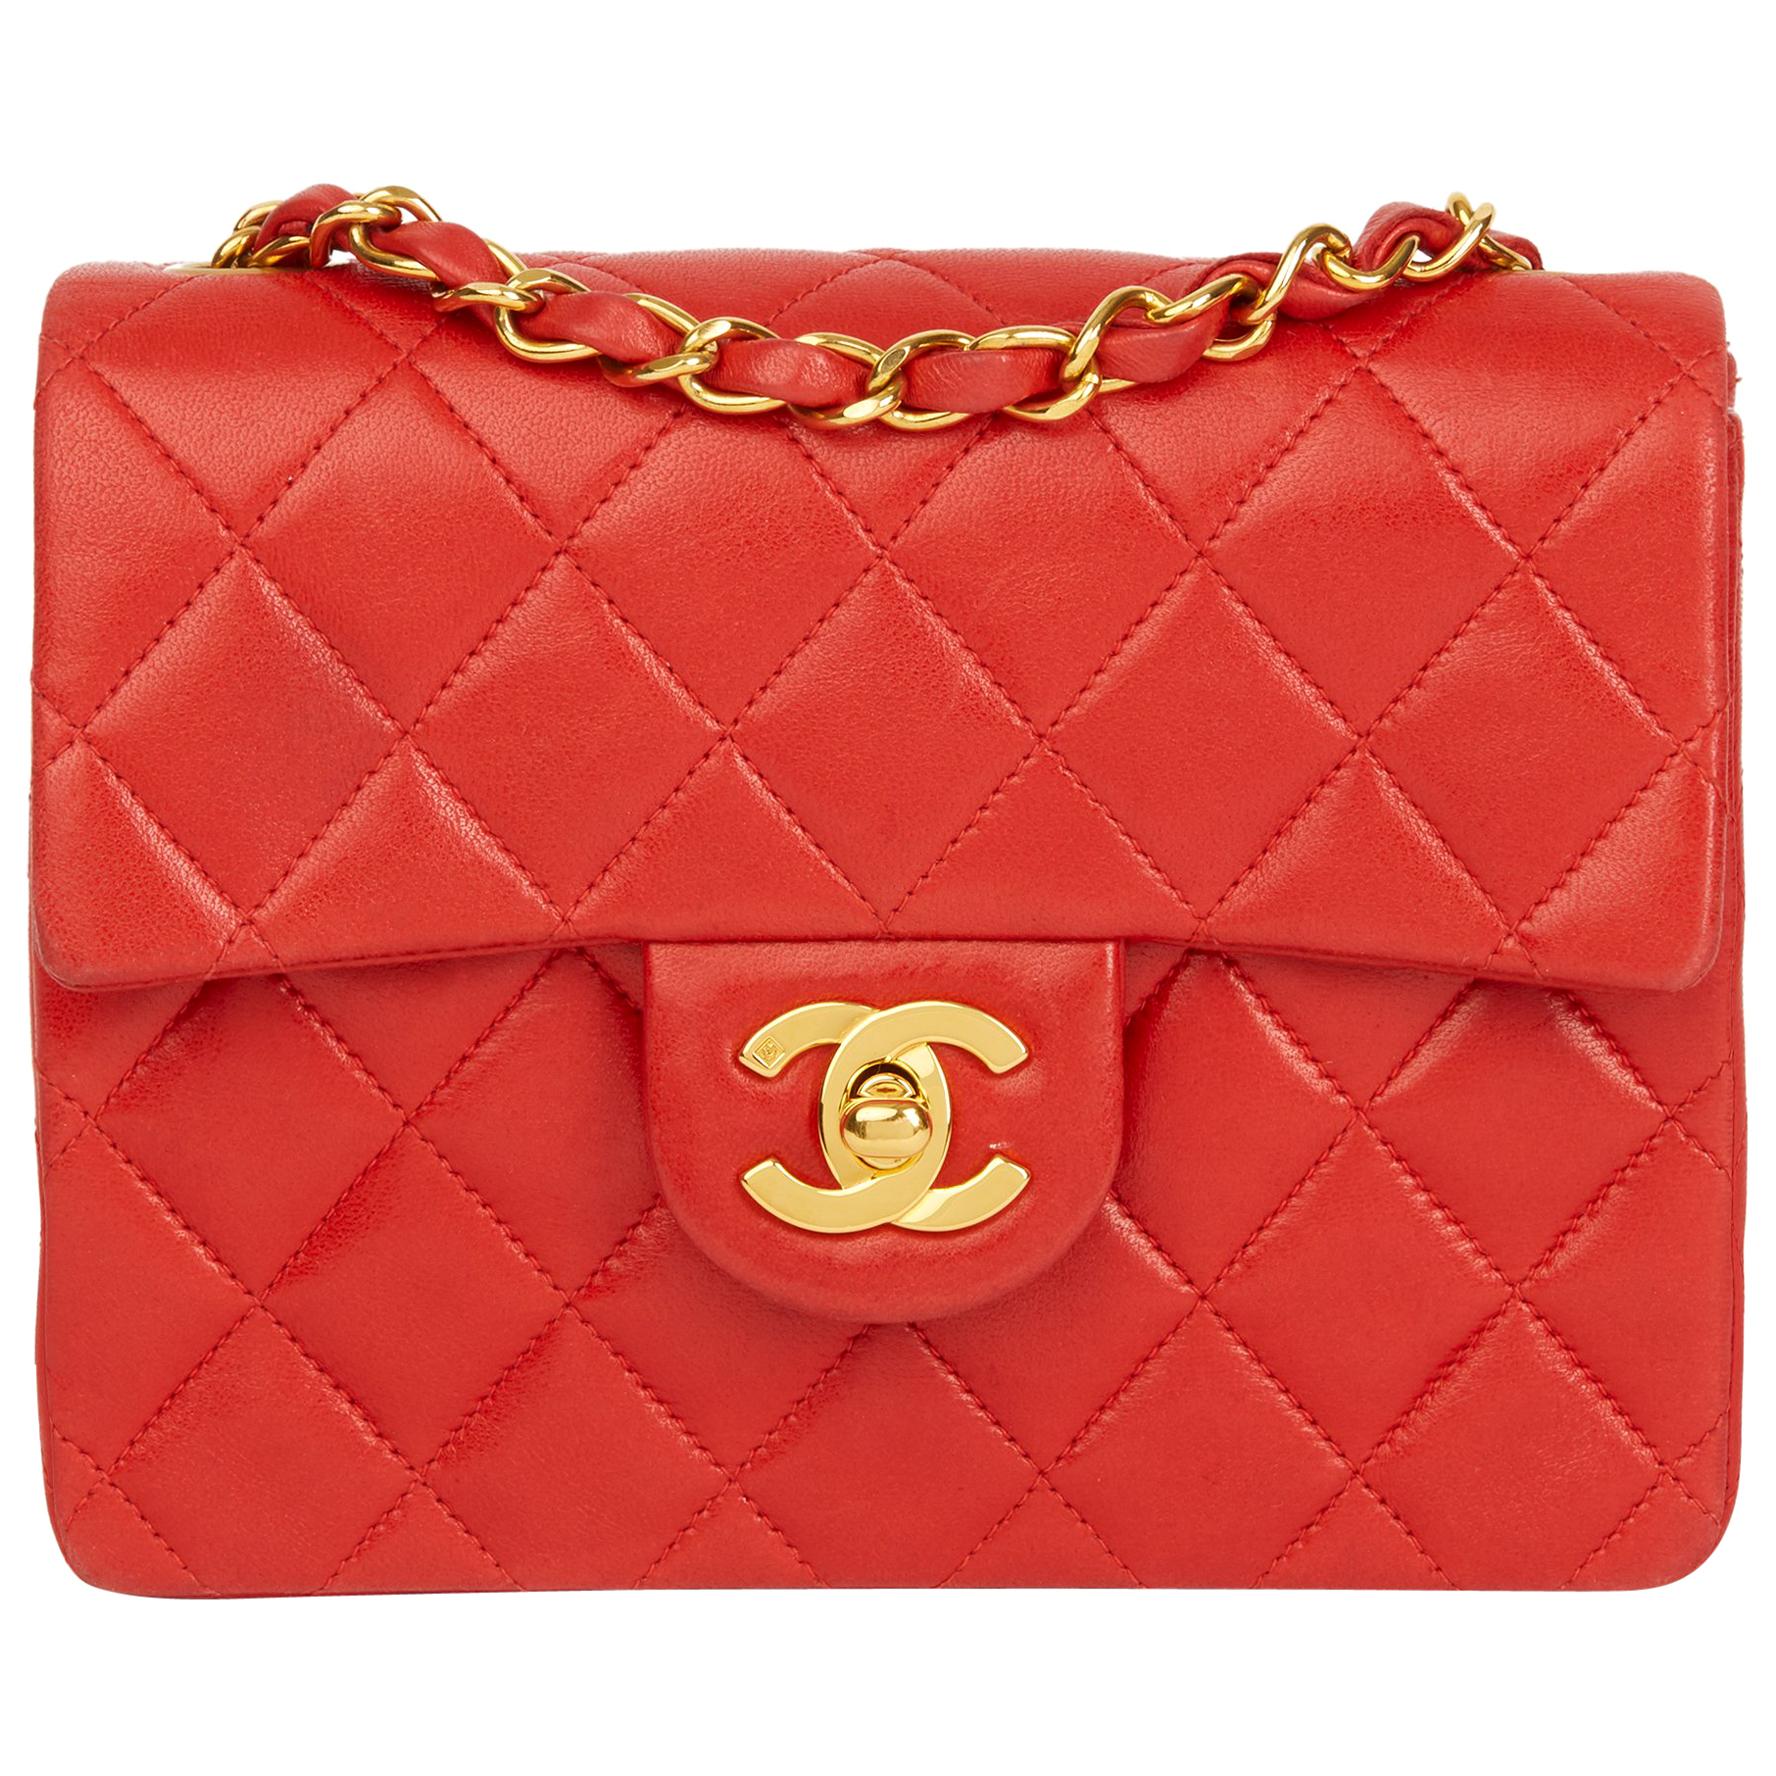 1991 Chanel Red Quilted Lambskin Vintage Mini Flap Bag